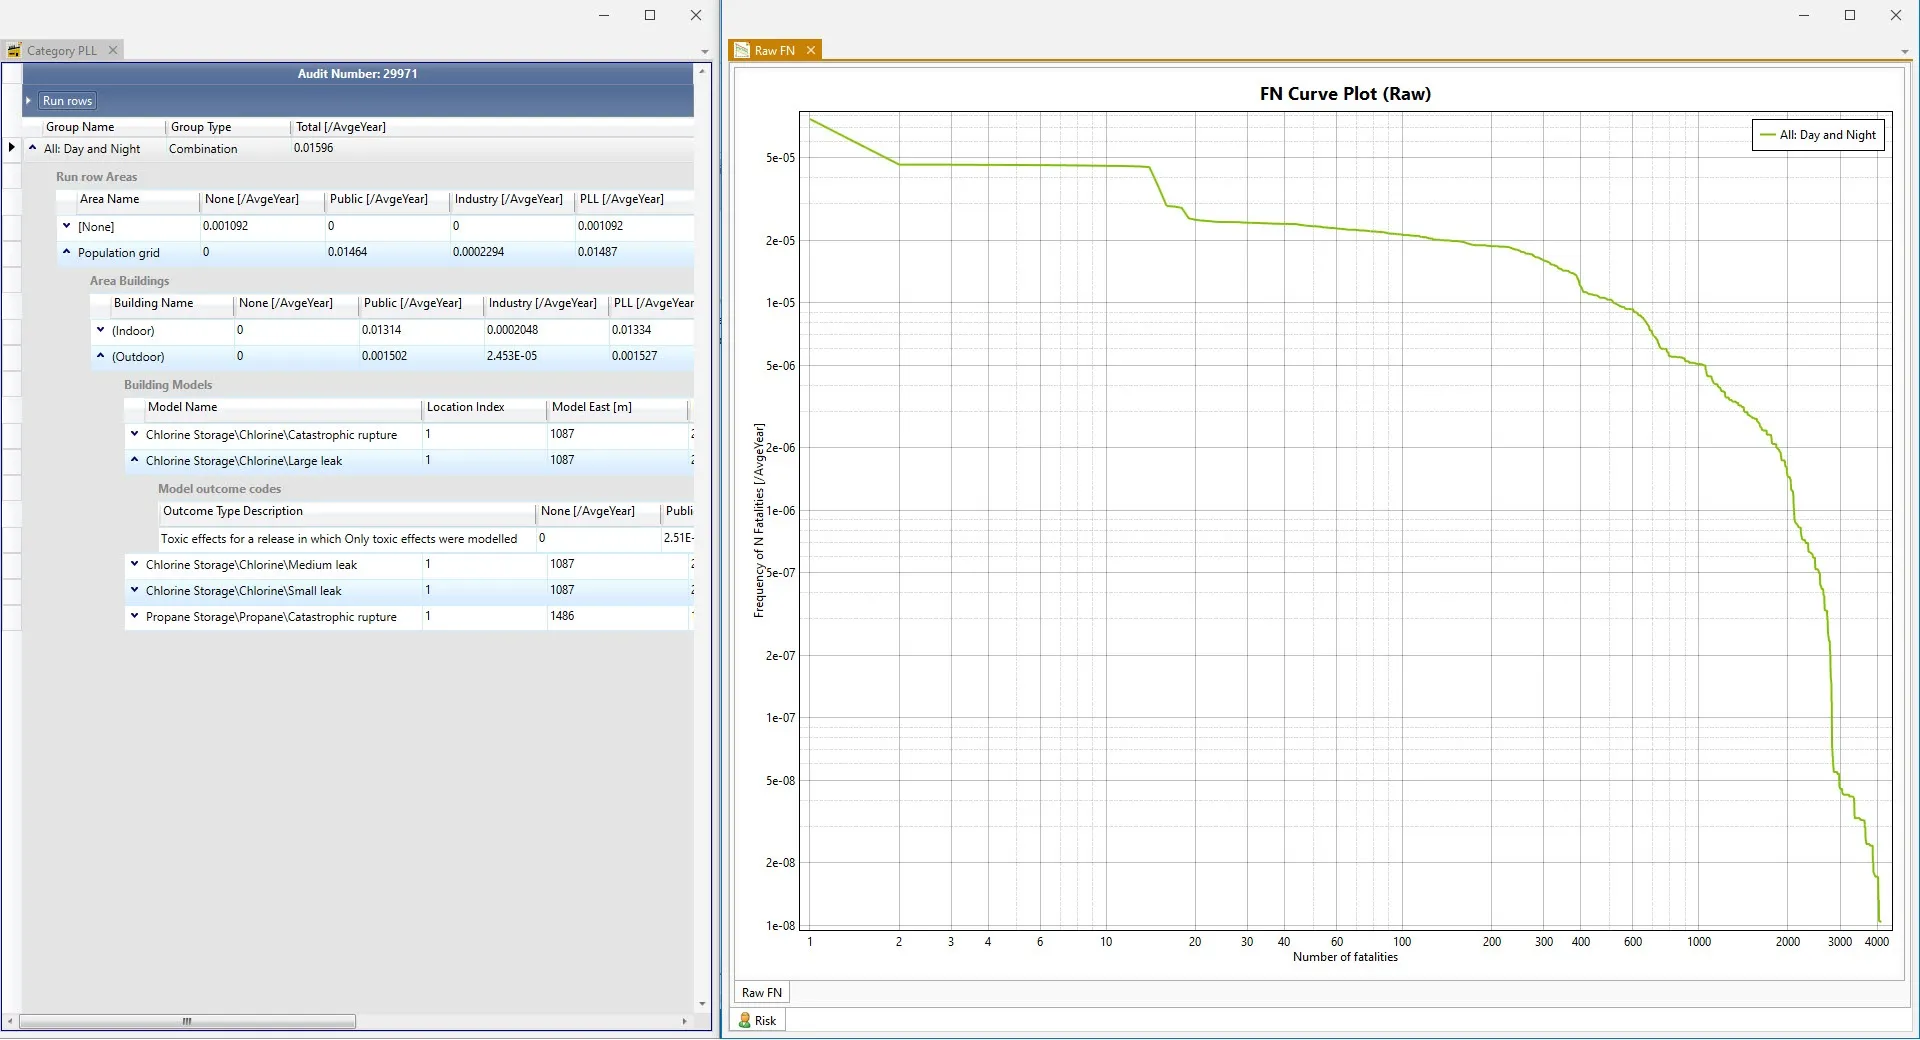 Screenshot from Safeti software, showing societal risk results in tabular and graphical views